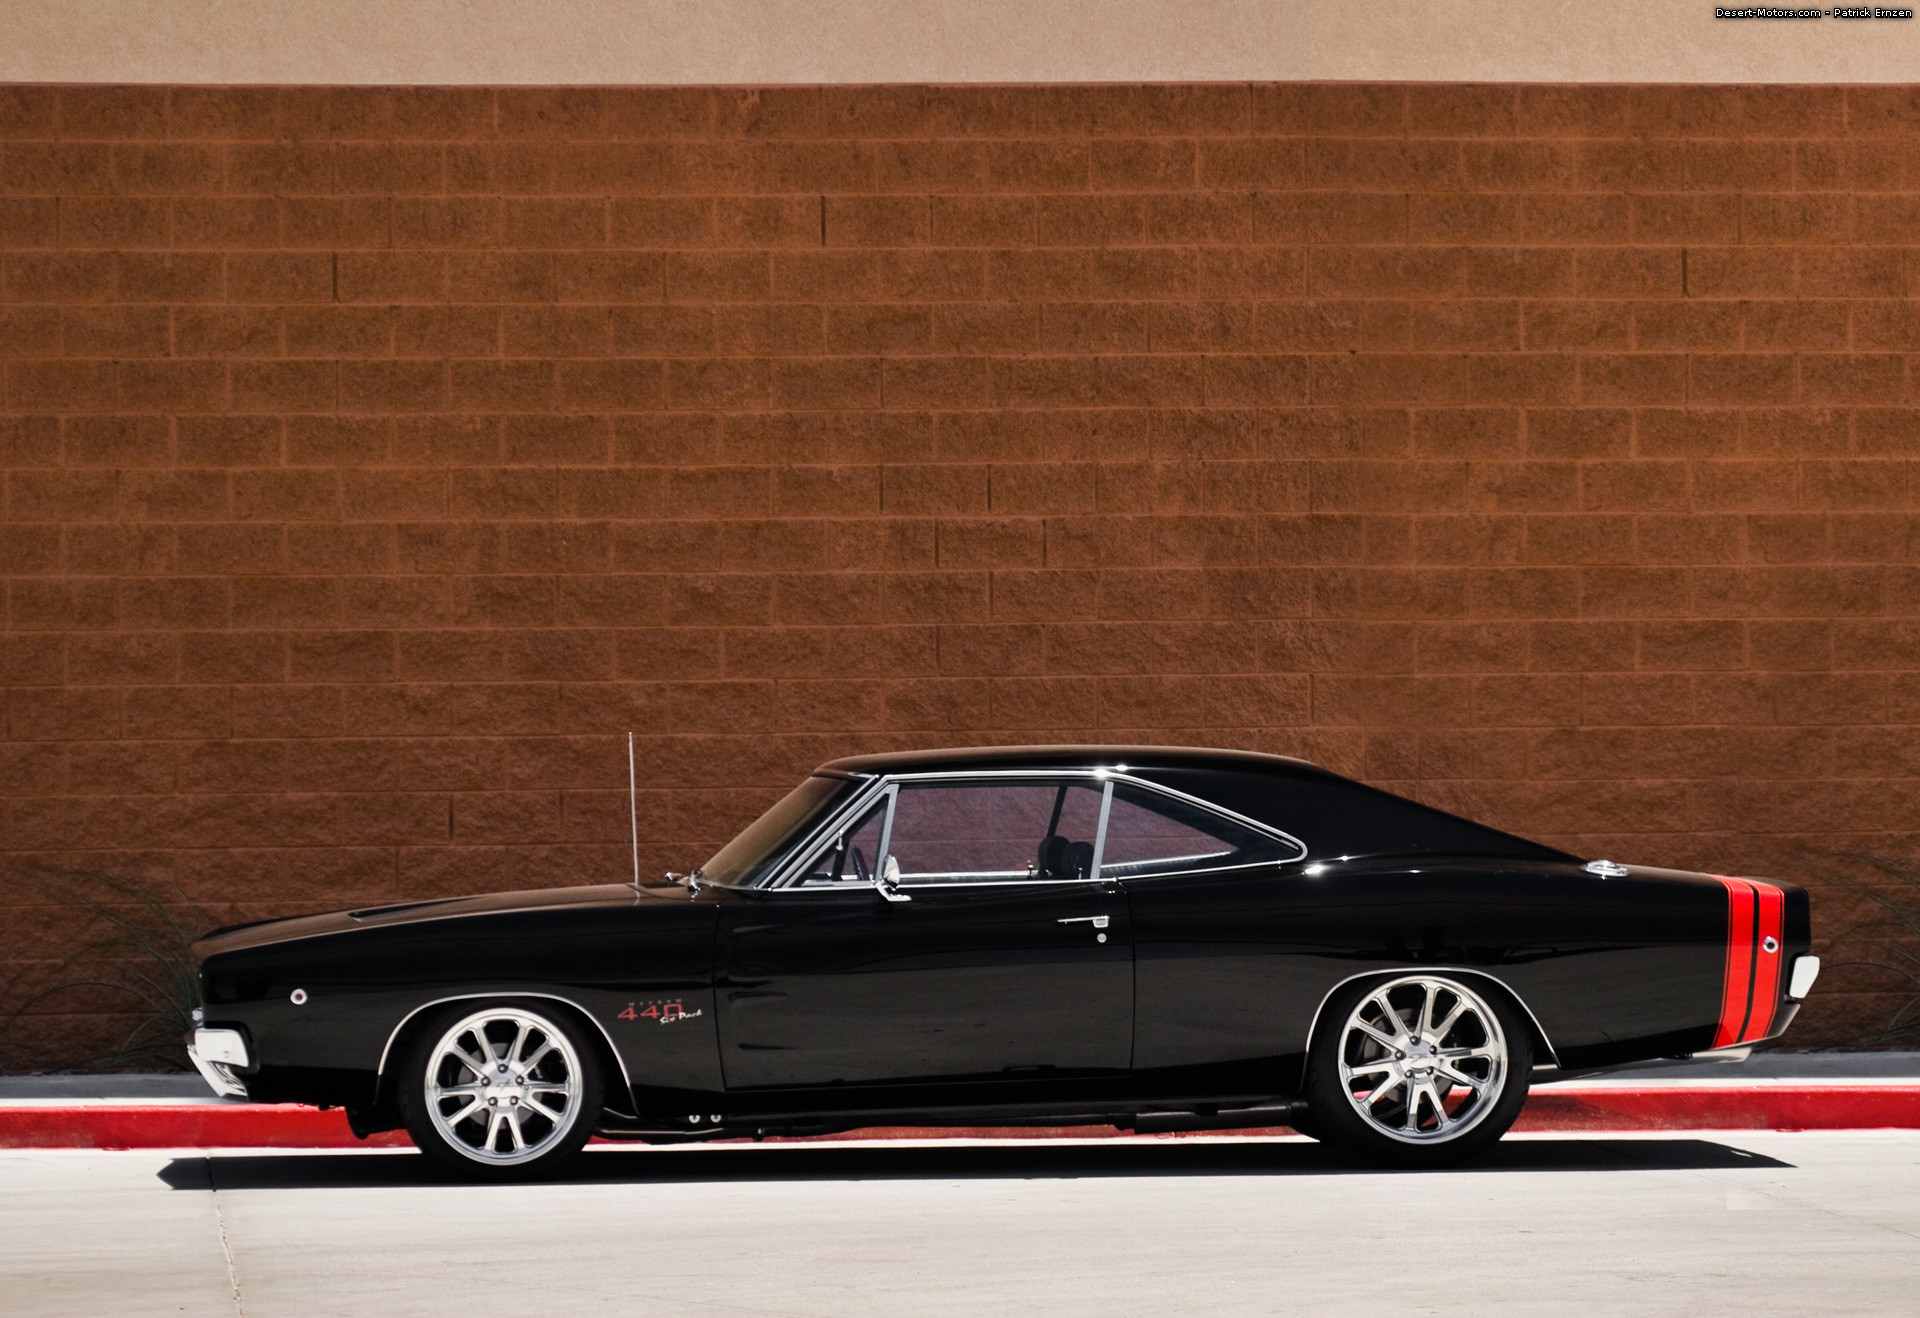 desertmotors: “ 1968 Dodge Charger R/T ”